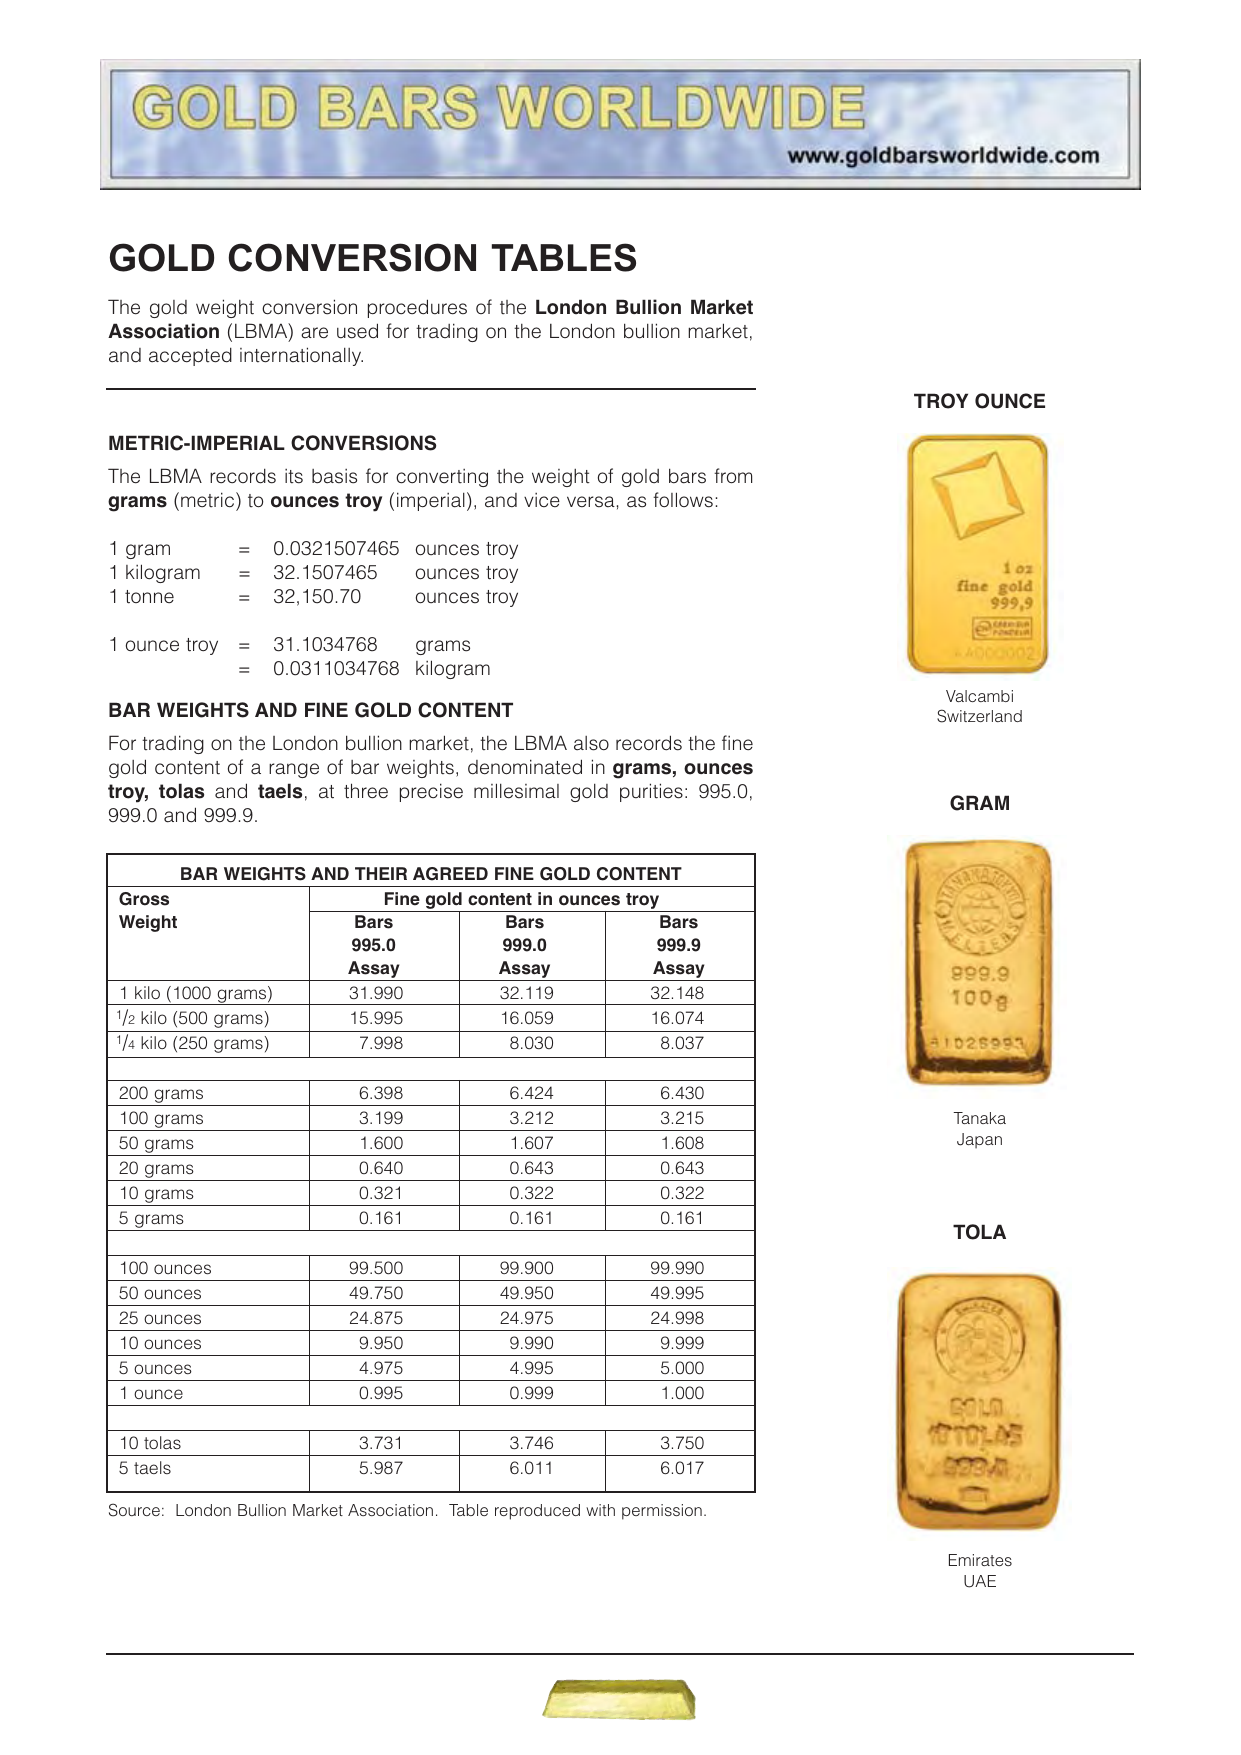 How Many Grams Make One Ounce of Gold DillonkruwValencia